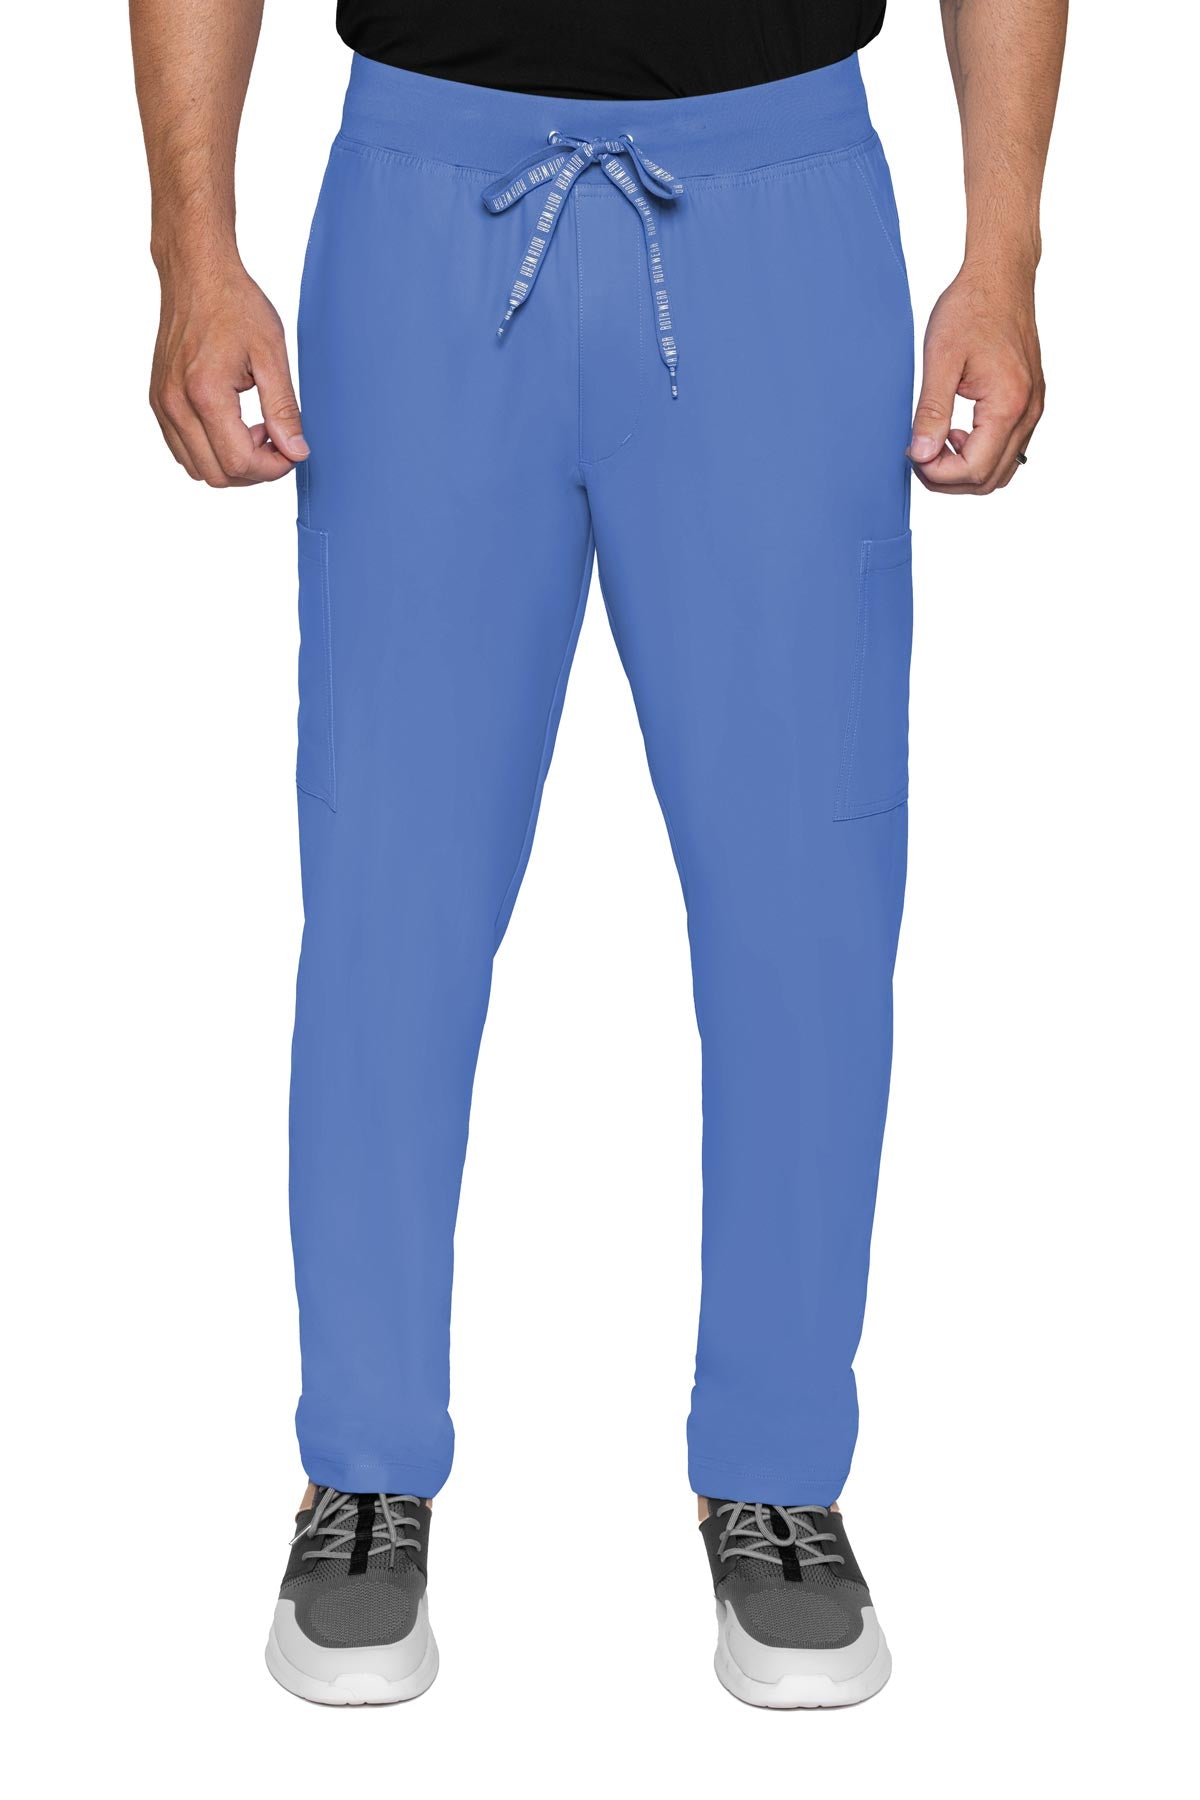 Med Couture Mens Scrub Pants RothWear Insight in ceil at Parker's Clothing and Shoes.